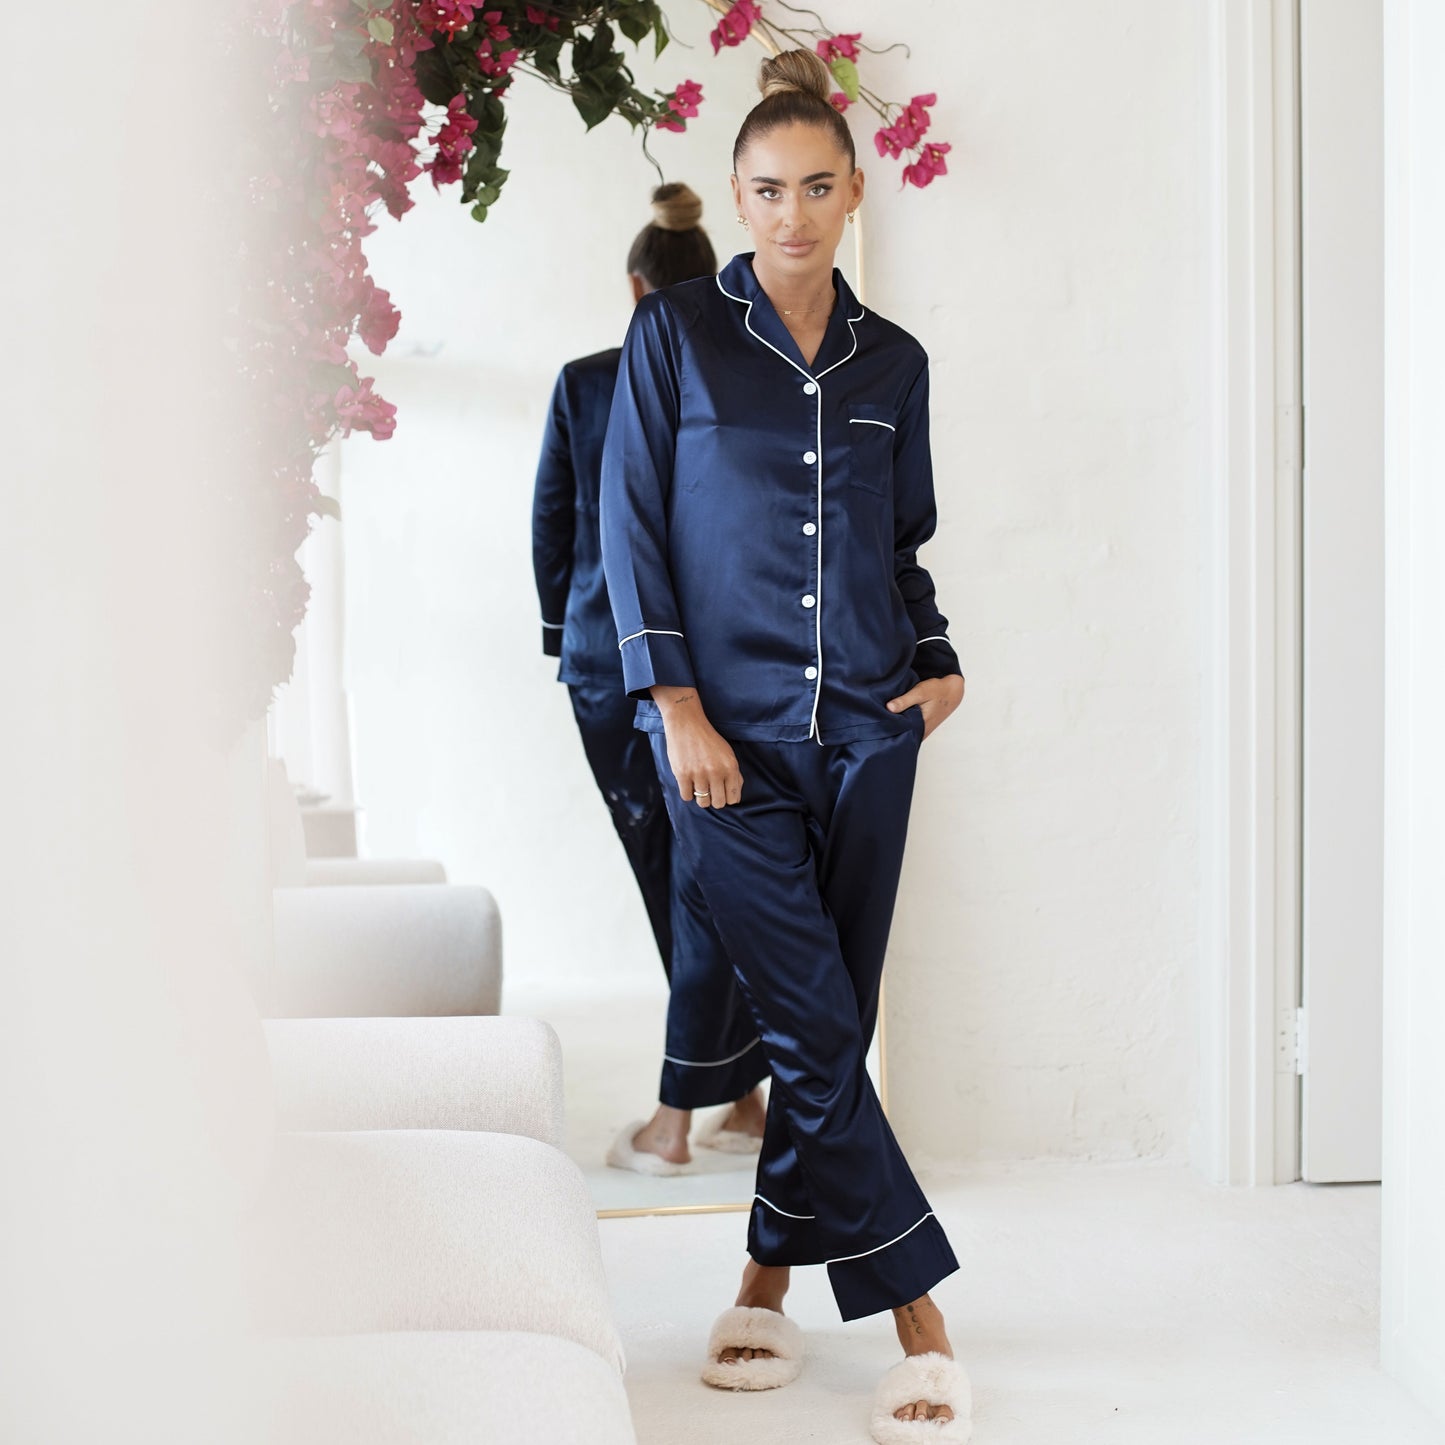 Long Sleeve Pyjamas in Navy with White Piping